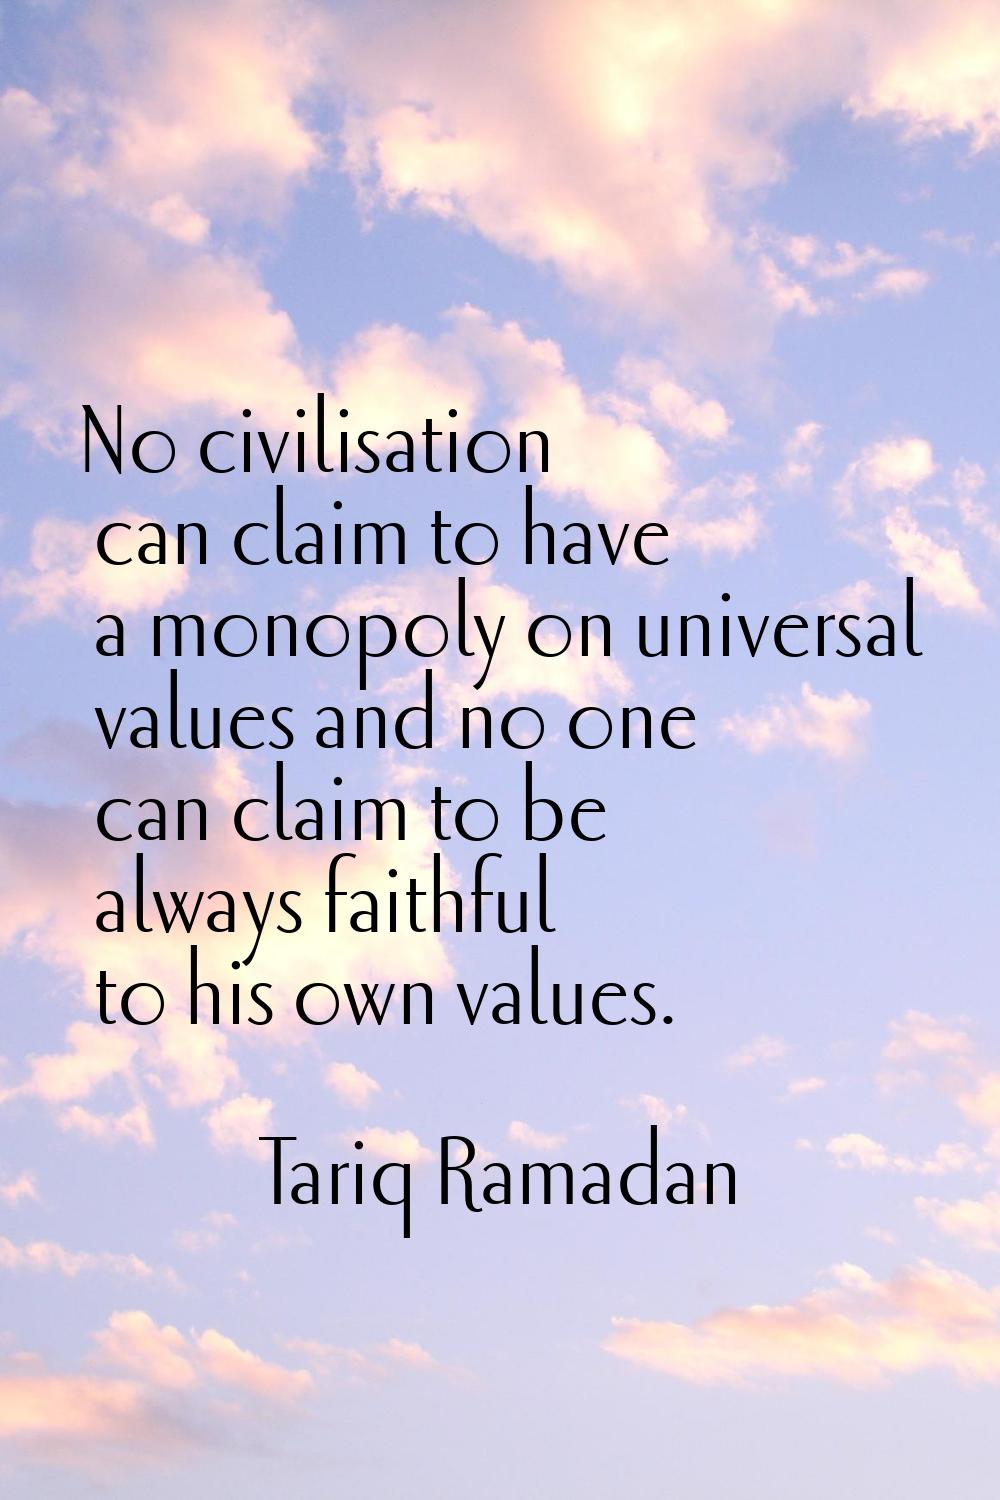 No civilisation can claim to have a monopoly on universal values and no one can claim to be always 